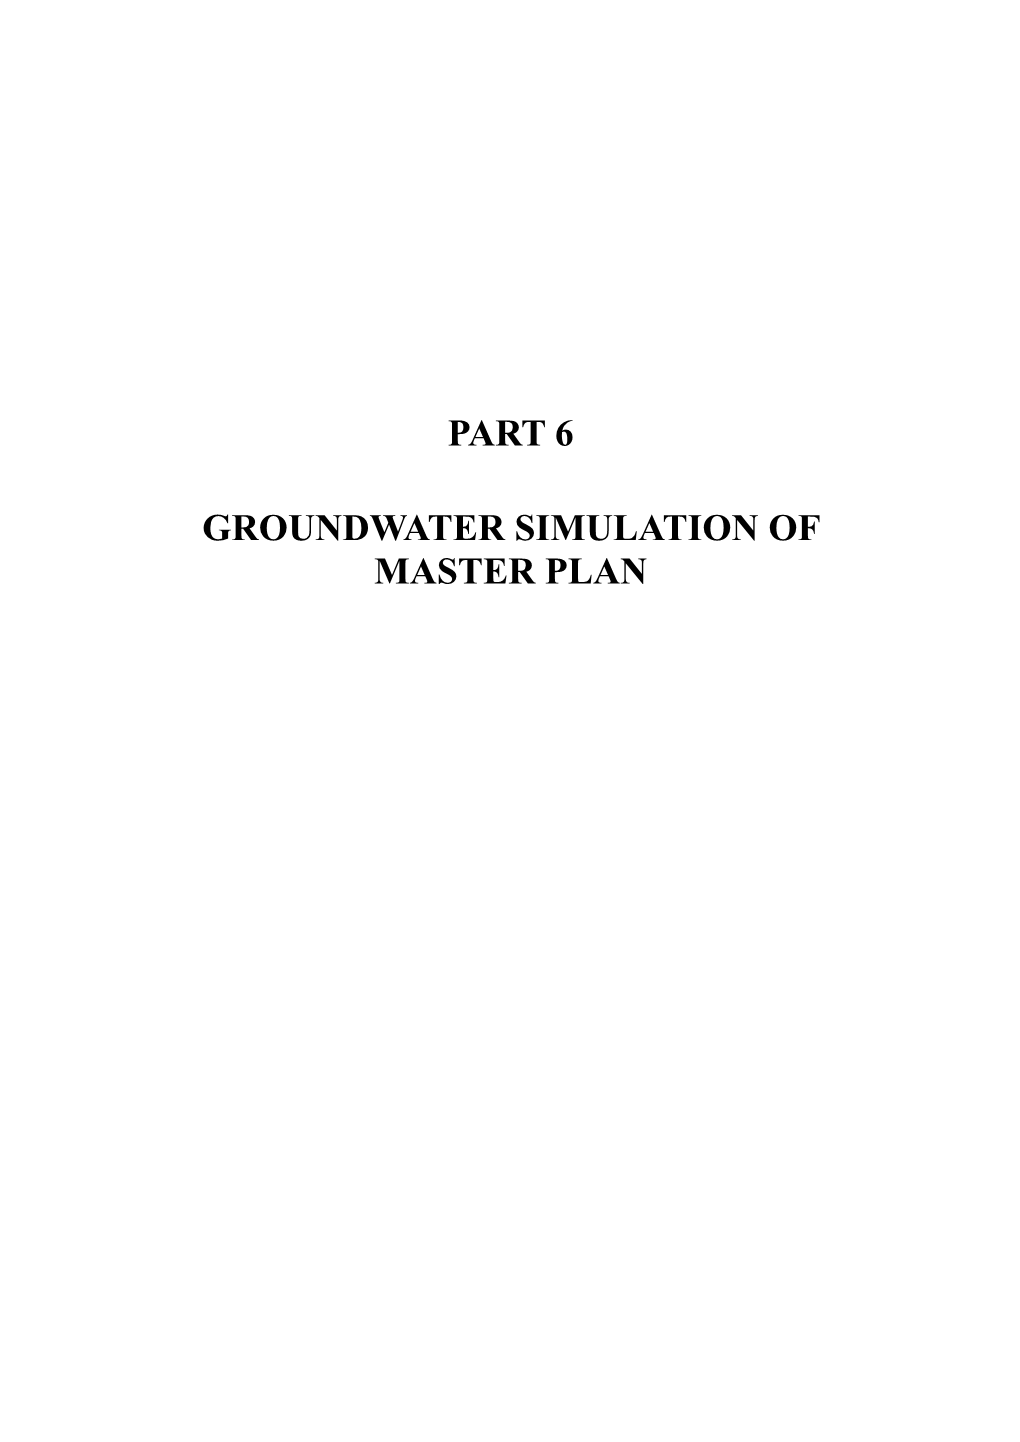 Part 6 Groundwater Simulation of Master Plan